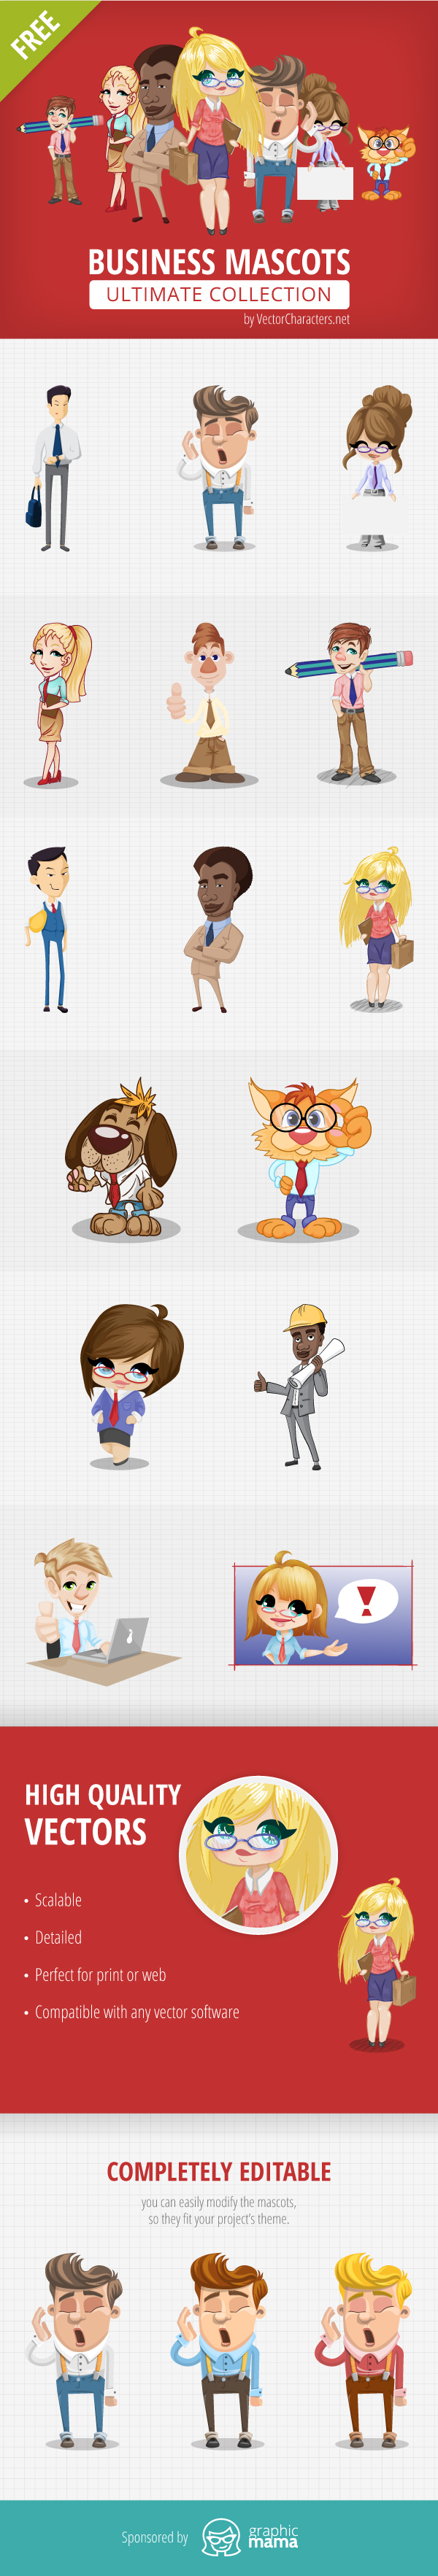 Business Mascots Ultimate Collection